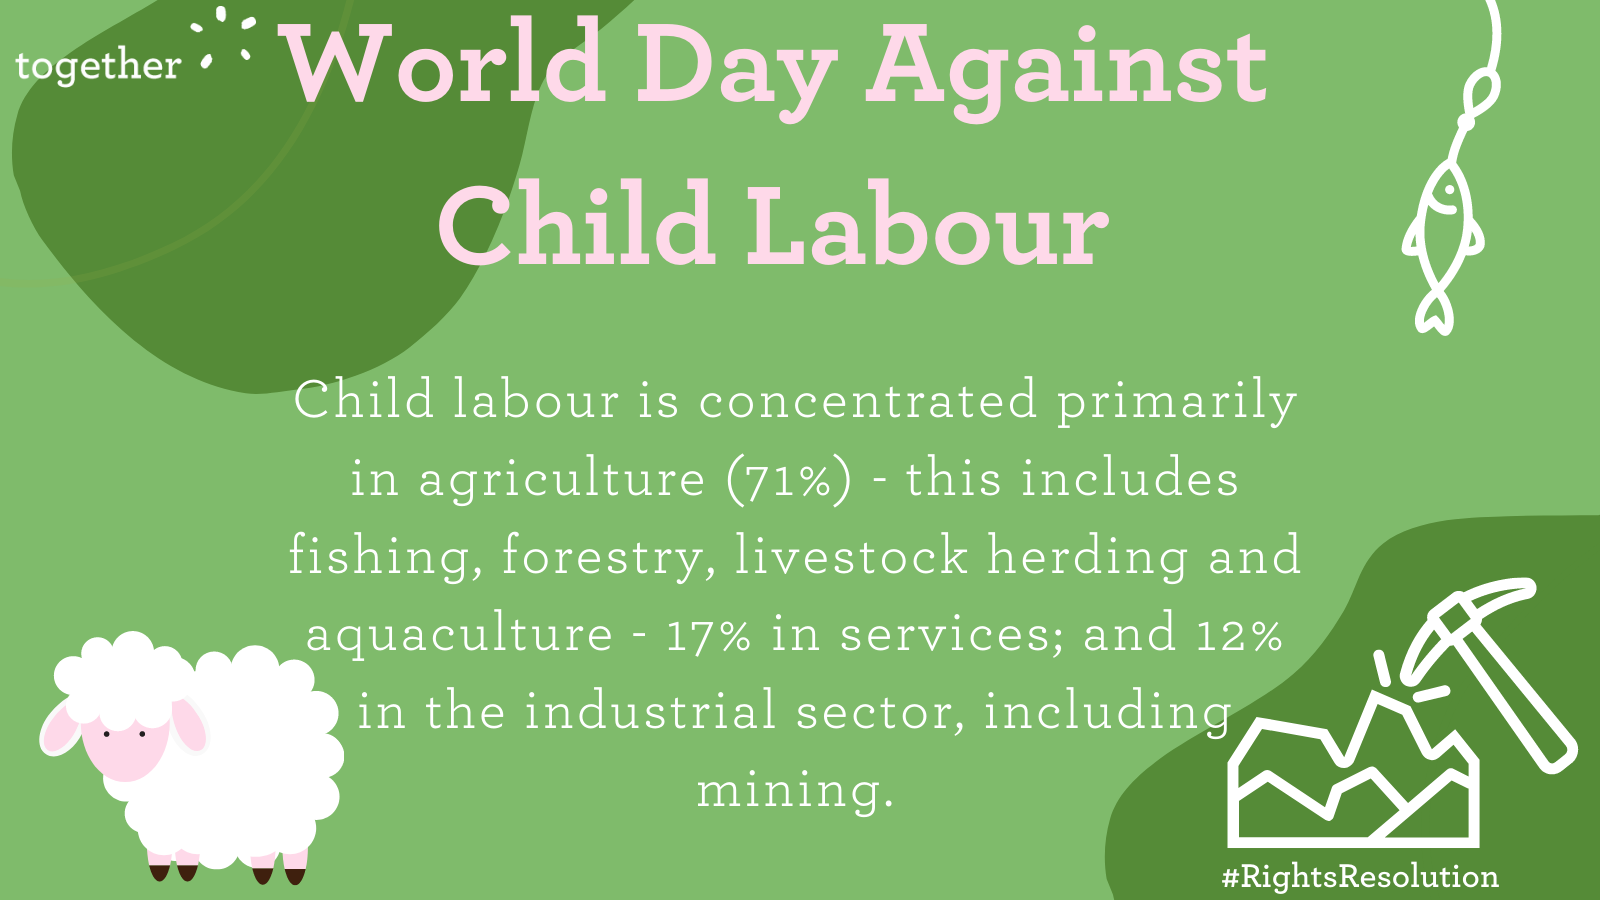 Child labour is concentrated primarily in agriculture (71%) - this includes fishing, forestry, livestock herding and aquaculture - 17% in services; and 12% in the industrial sector, including mining.